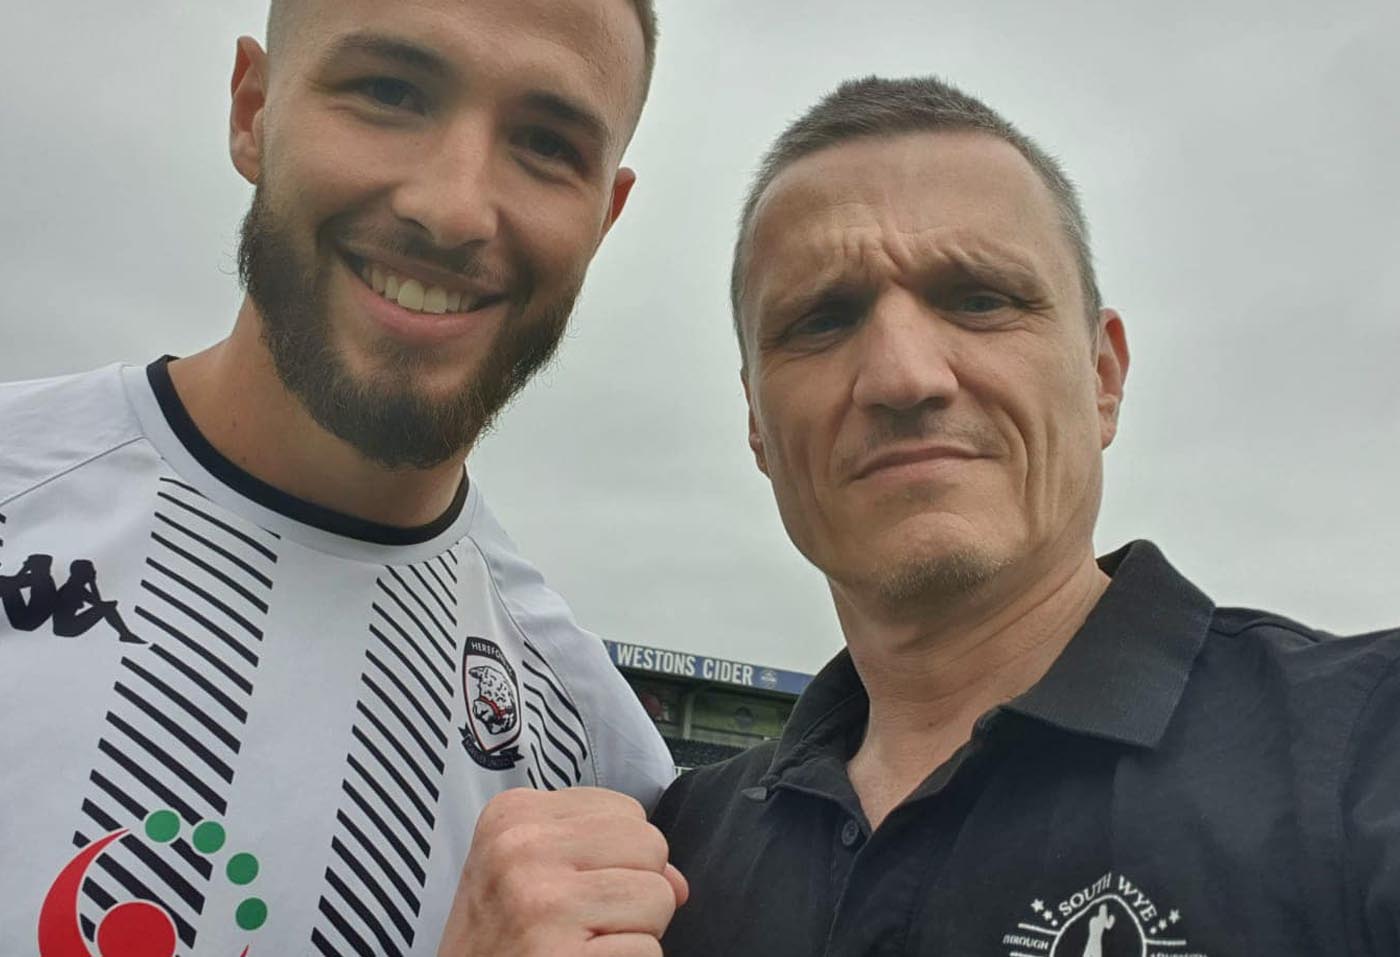 Hereford FC Defender Zak Lilly with SWPBA Head Coach Paul Catten